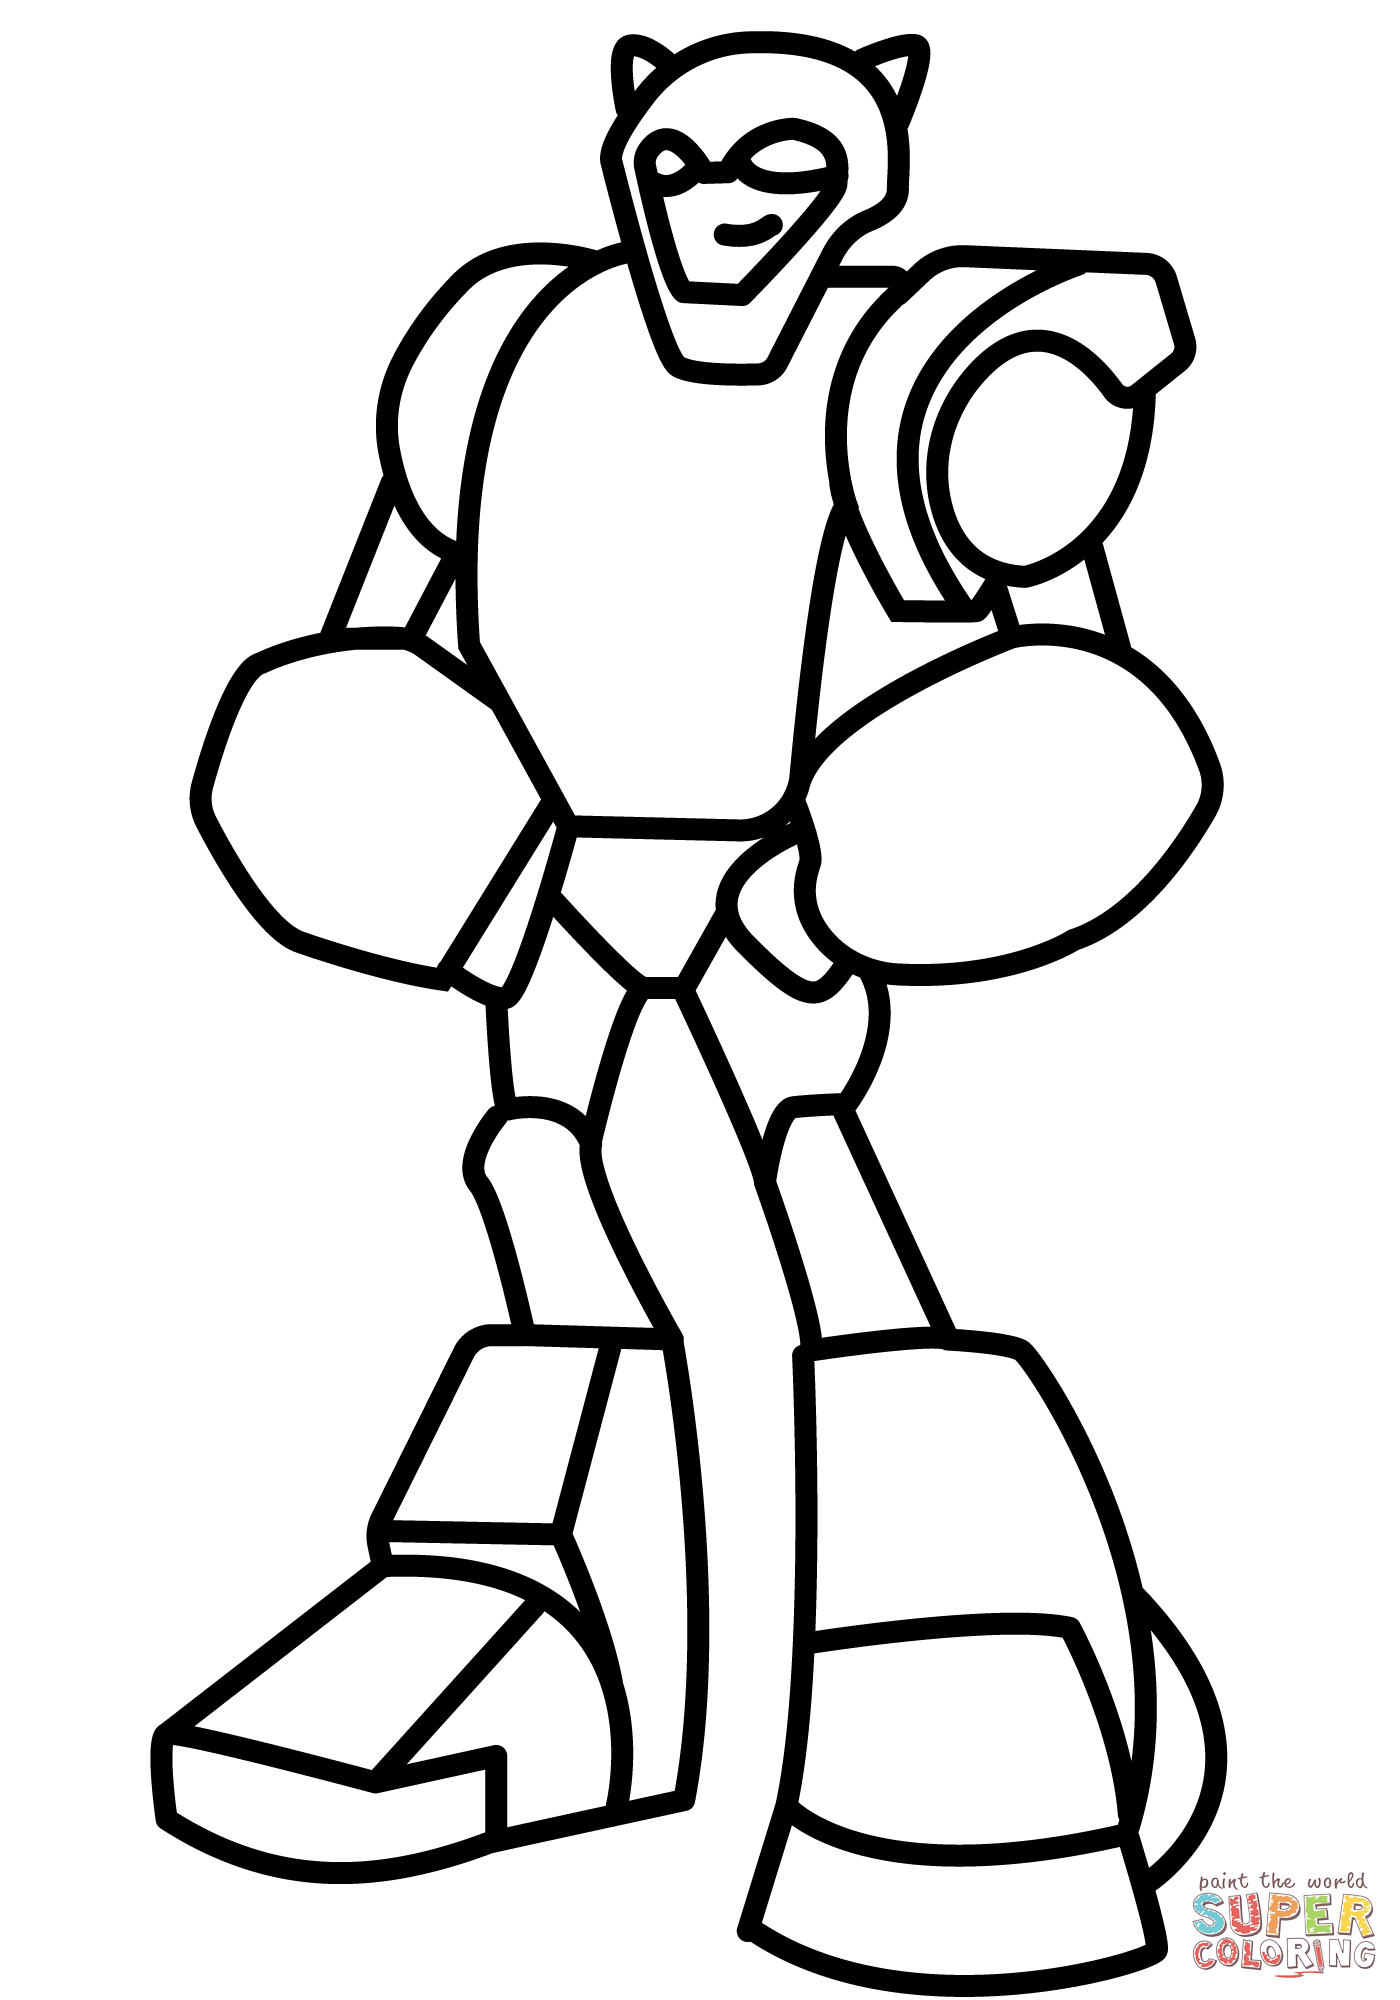 Chibi bumblebee transformer coloring page free printable coloring pages